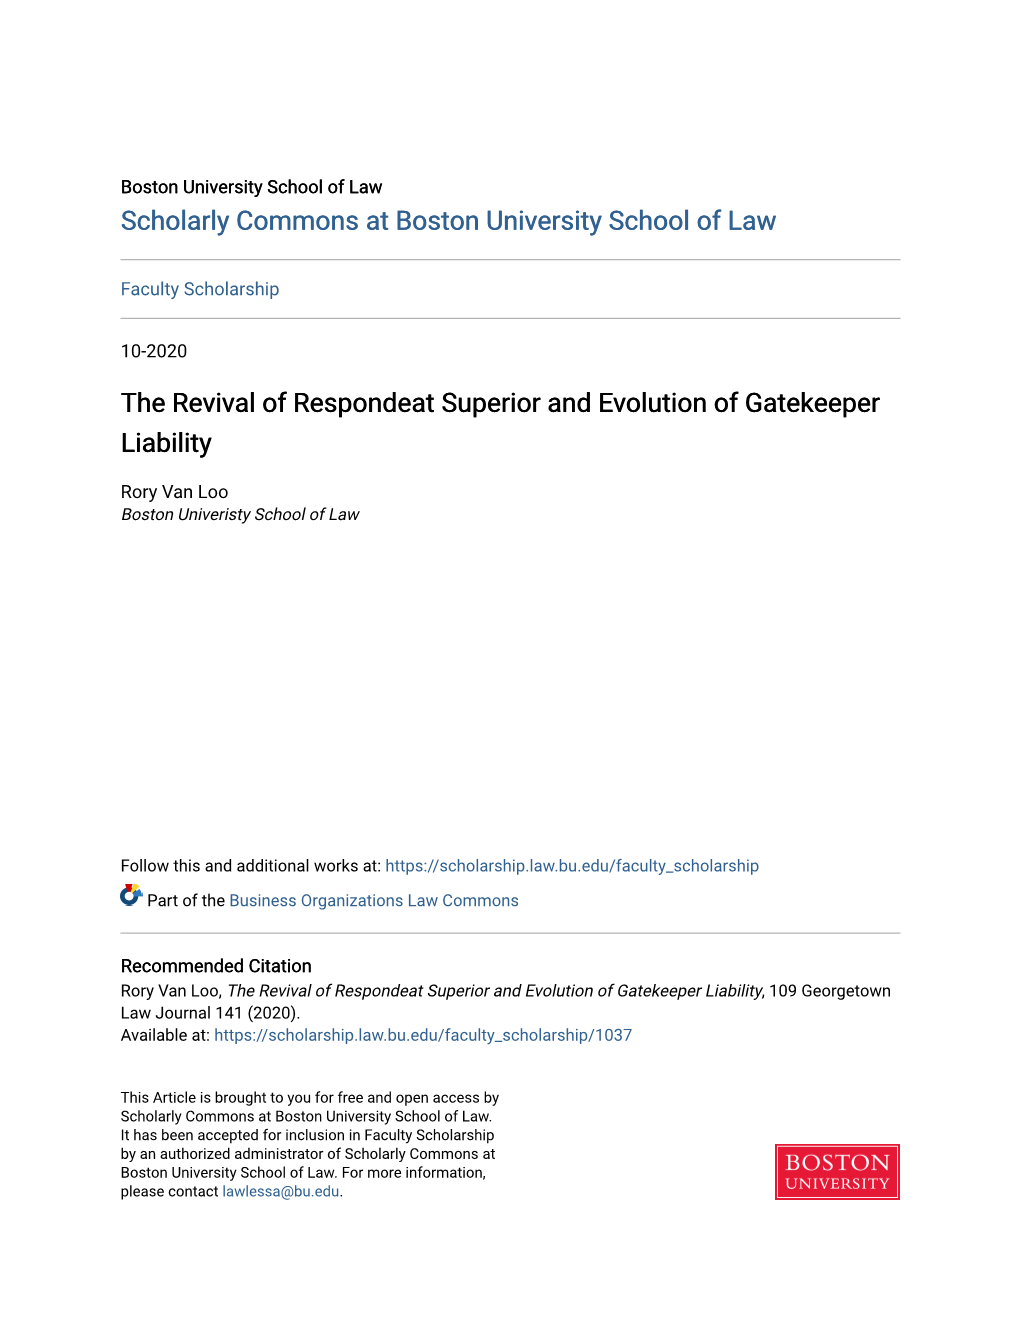 The Revival of Respondeat Superior and Evolution of Gatekeeper Liability